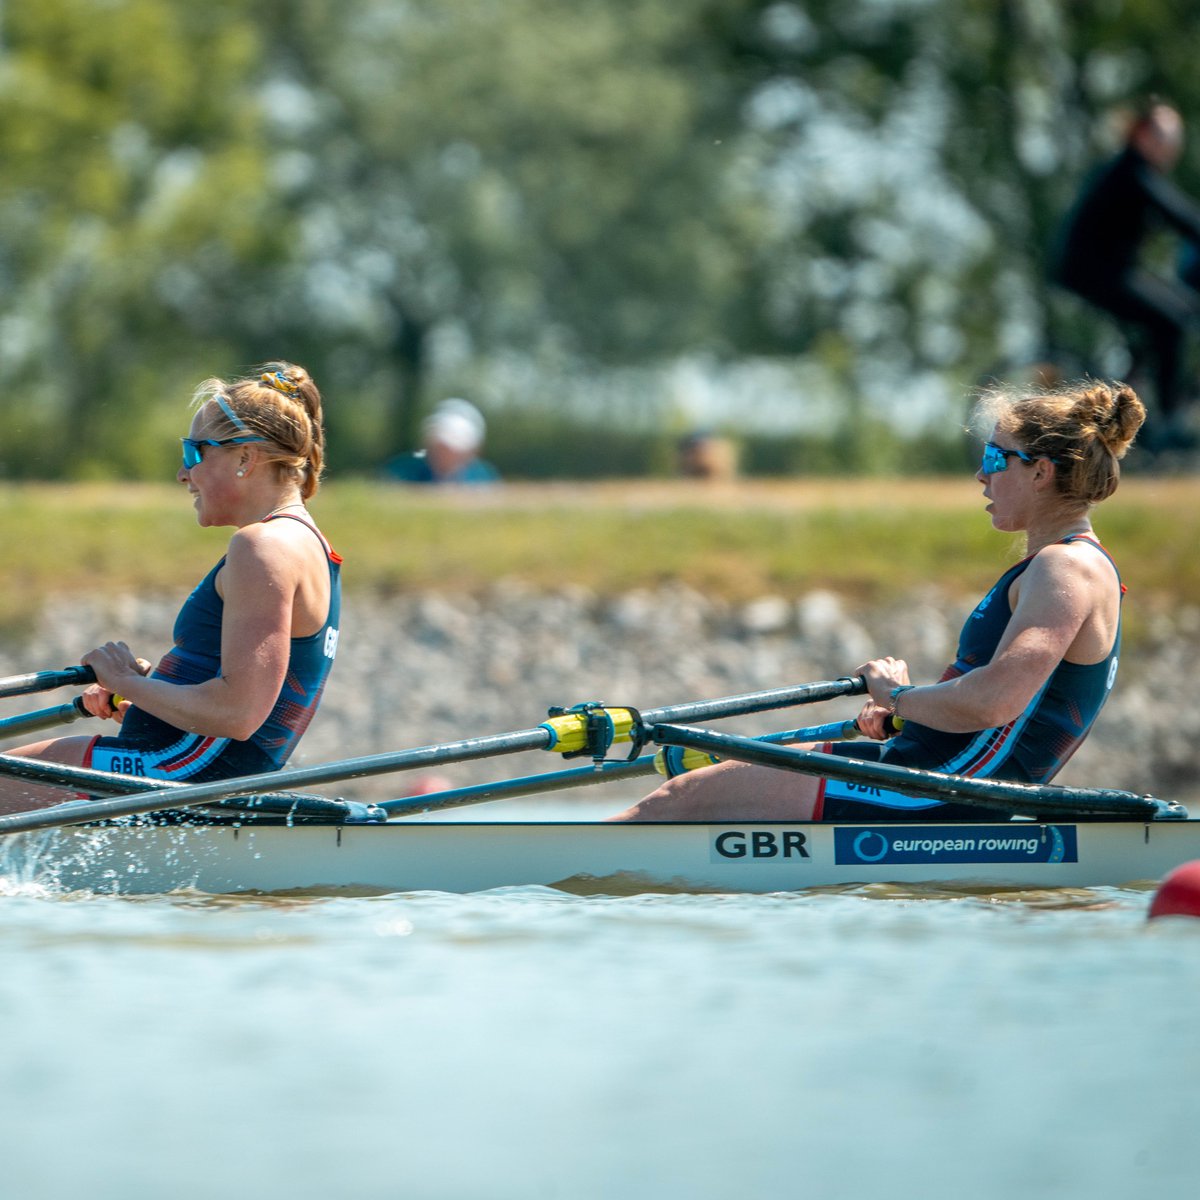 The Final Olympic Qualification Regatta is taking place from 19-21 May and the GB Rowing Team is aiming to add two more boats to the nine already qualified for the 2024 Paris Olympics🚣‍♂️ Find all timetables and results on the @WorldRowing website 👇 worldrowing.com/event/2024-wor…